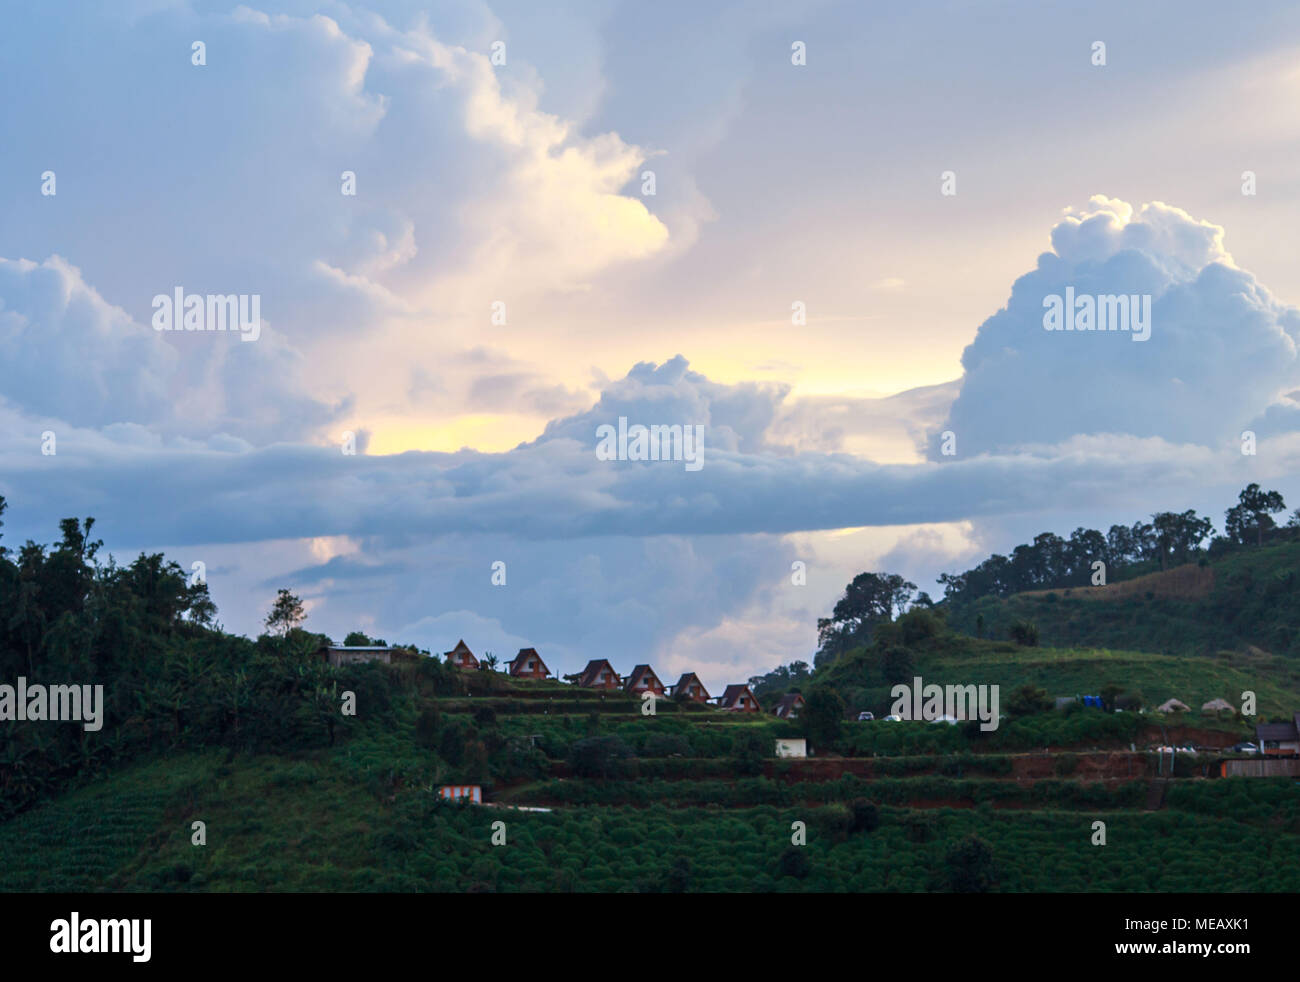 Dramatic sunset over small mountain cottages near the village of Moncham, Thailand Stock Photo